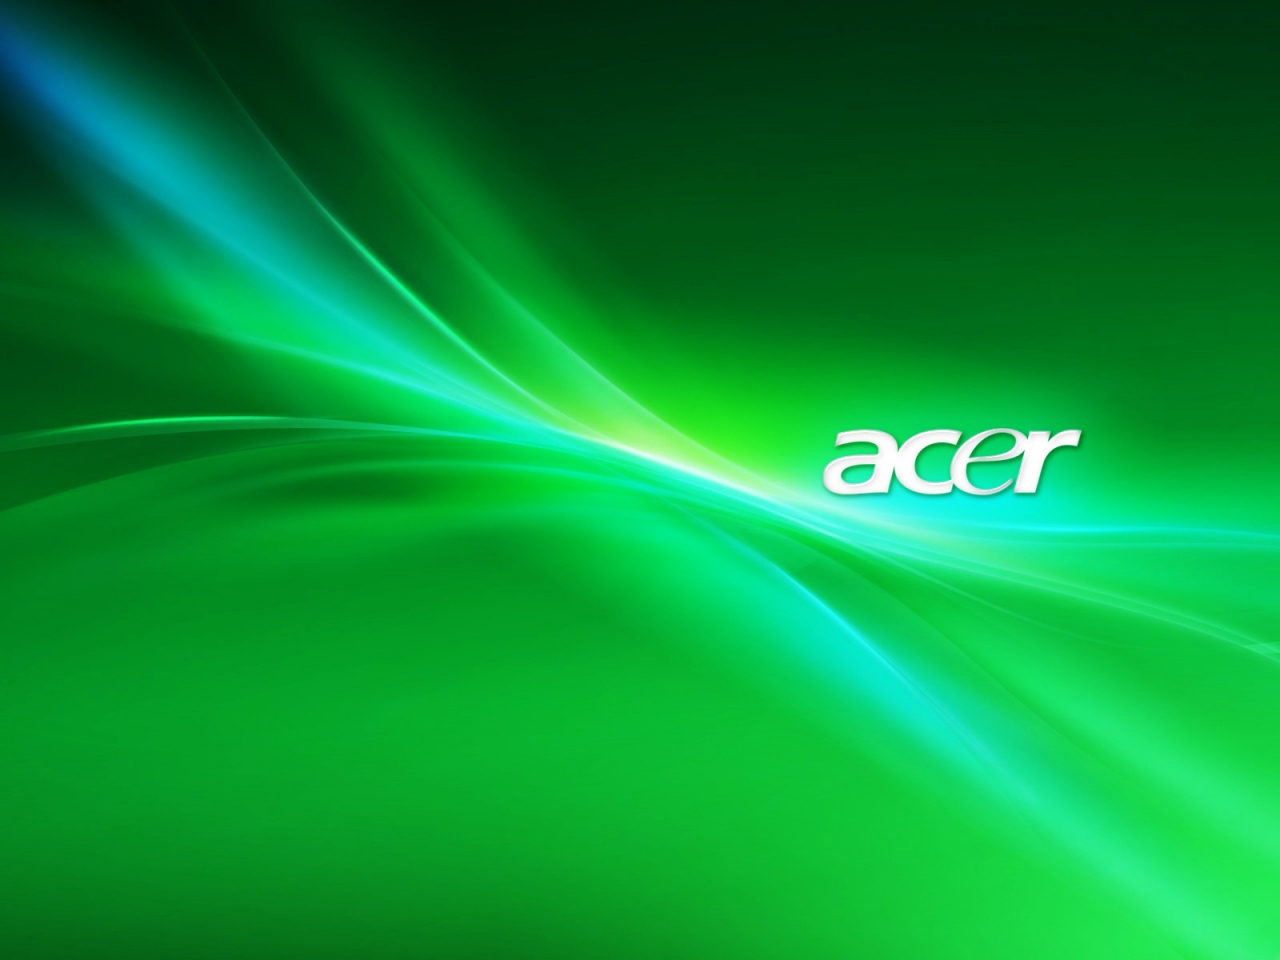 Acer Green for 1280 x 960 resolution